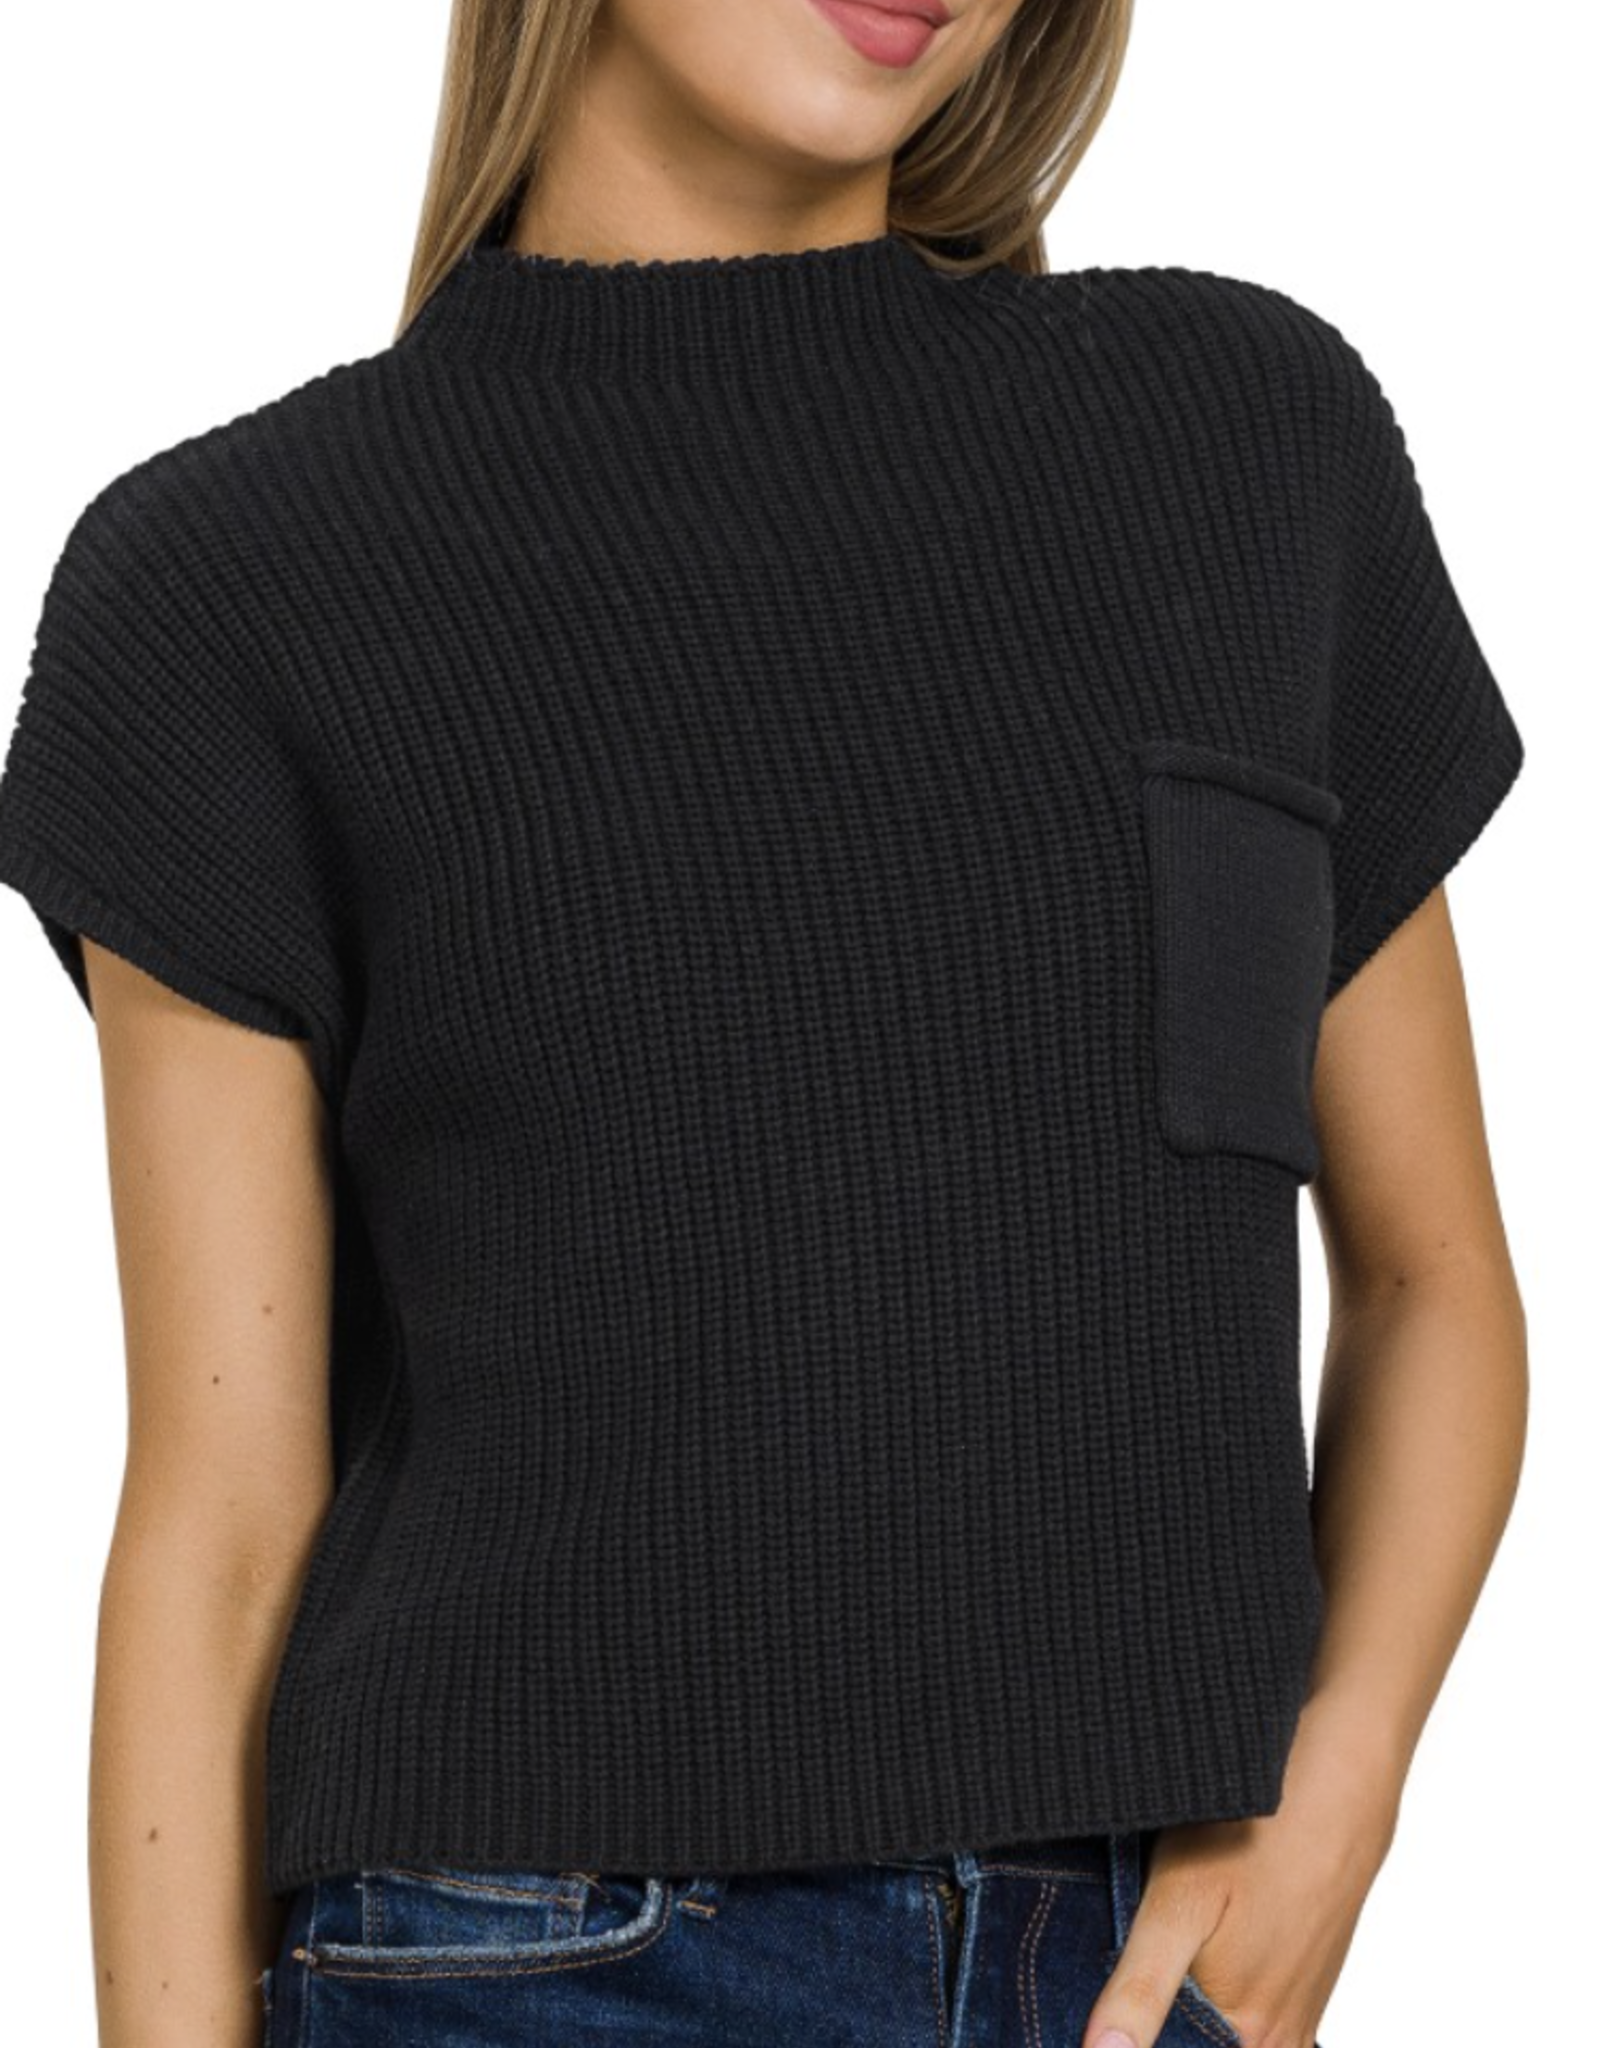 Miss Bliss Mock Neck Short Sleeve Cropped Sweater